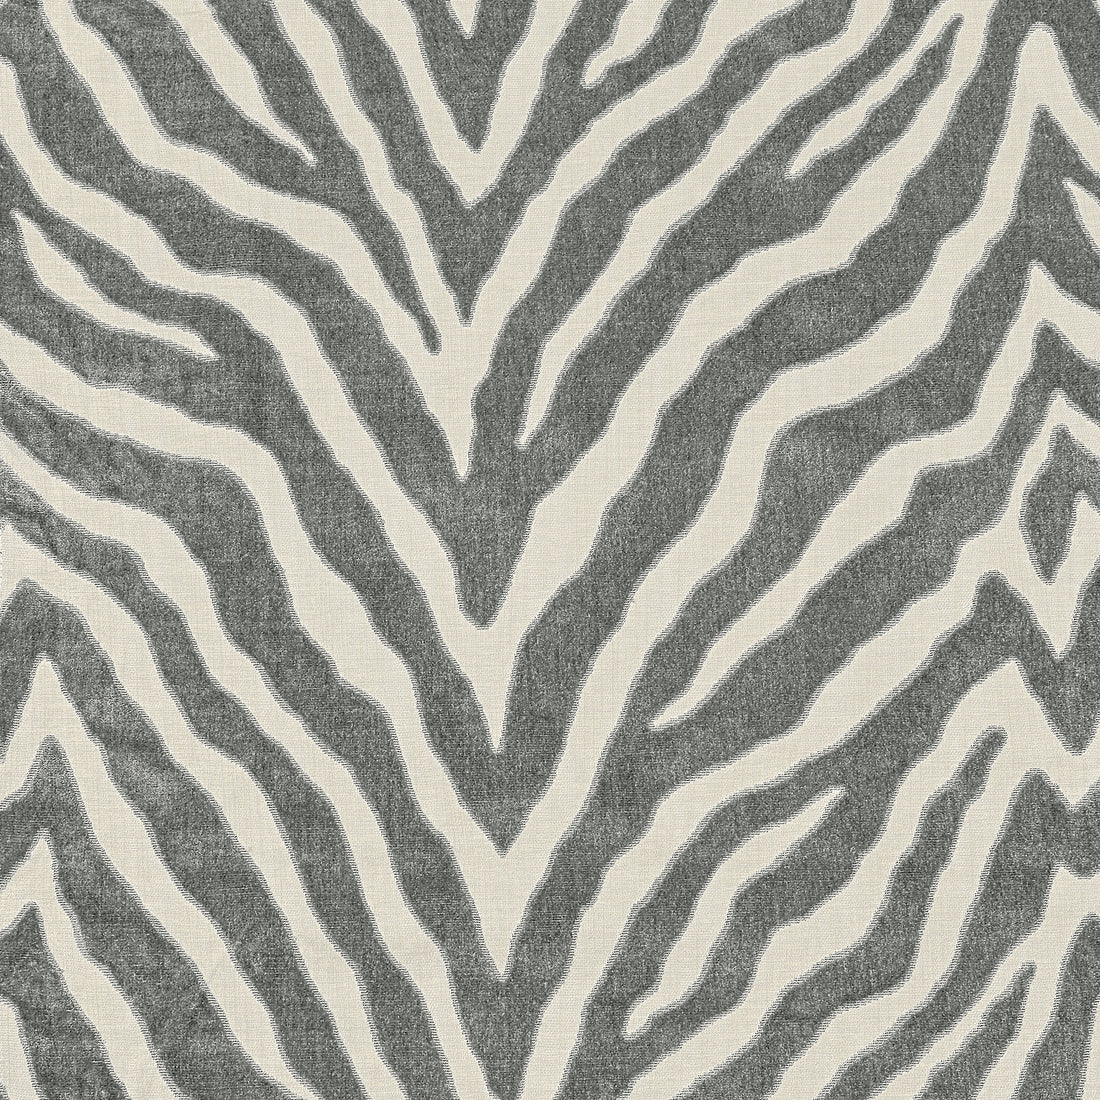 Etosha Velvet fabric in graphite color - pattern number W80404 - by Thibaut in the Woven Resource Vol 10 Menagerie collection